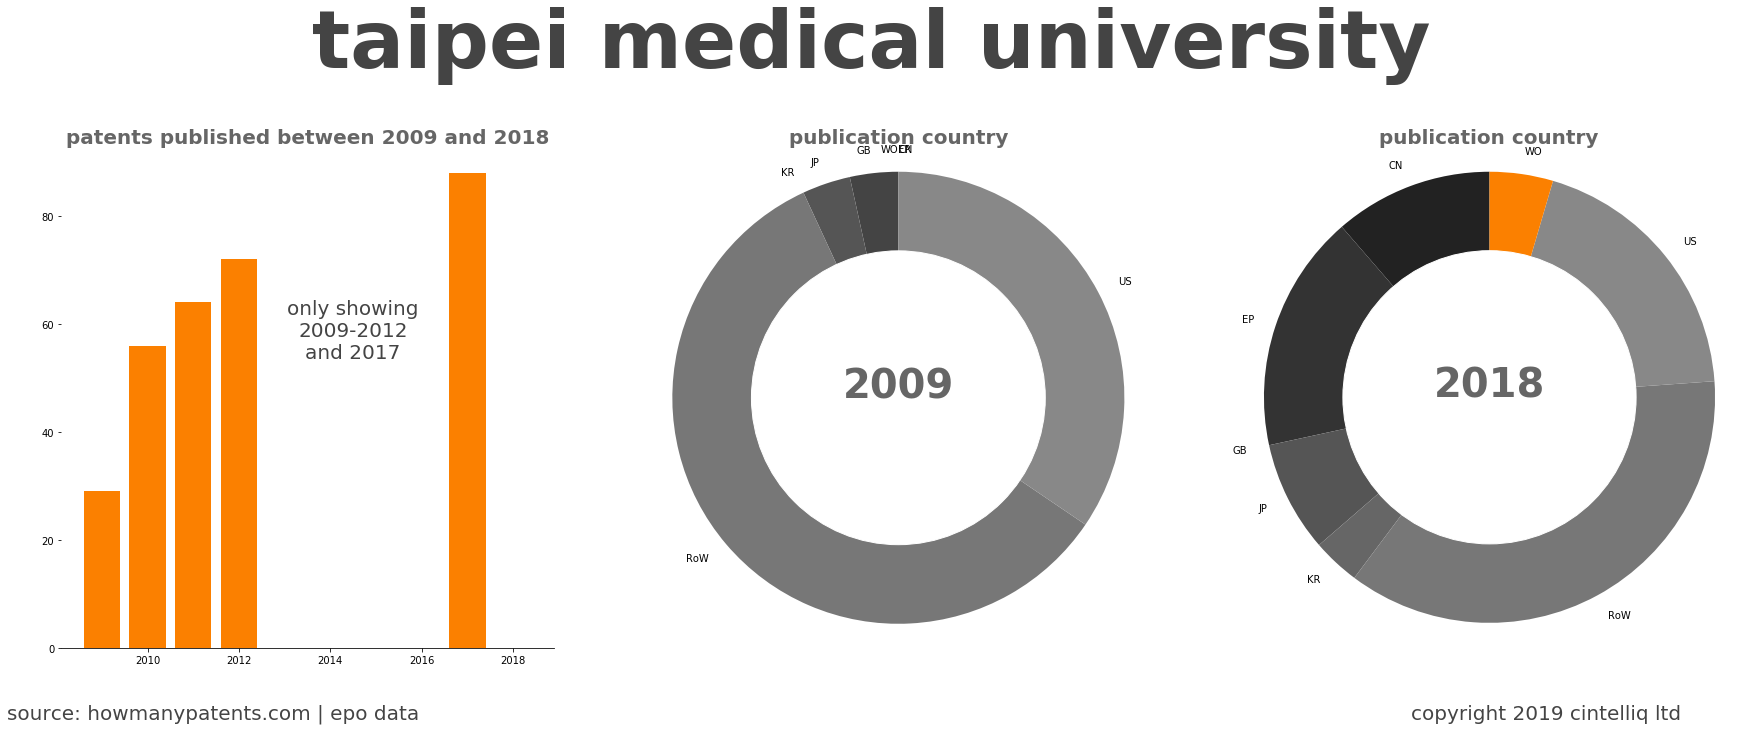 summary of patents for Taipei Medical University